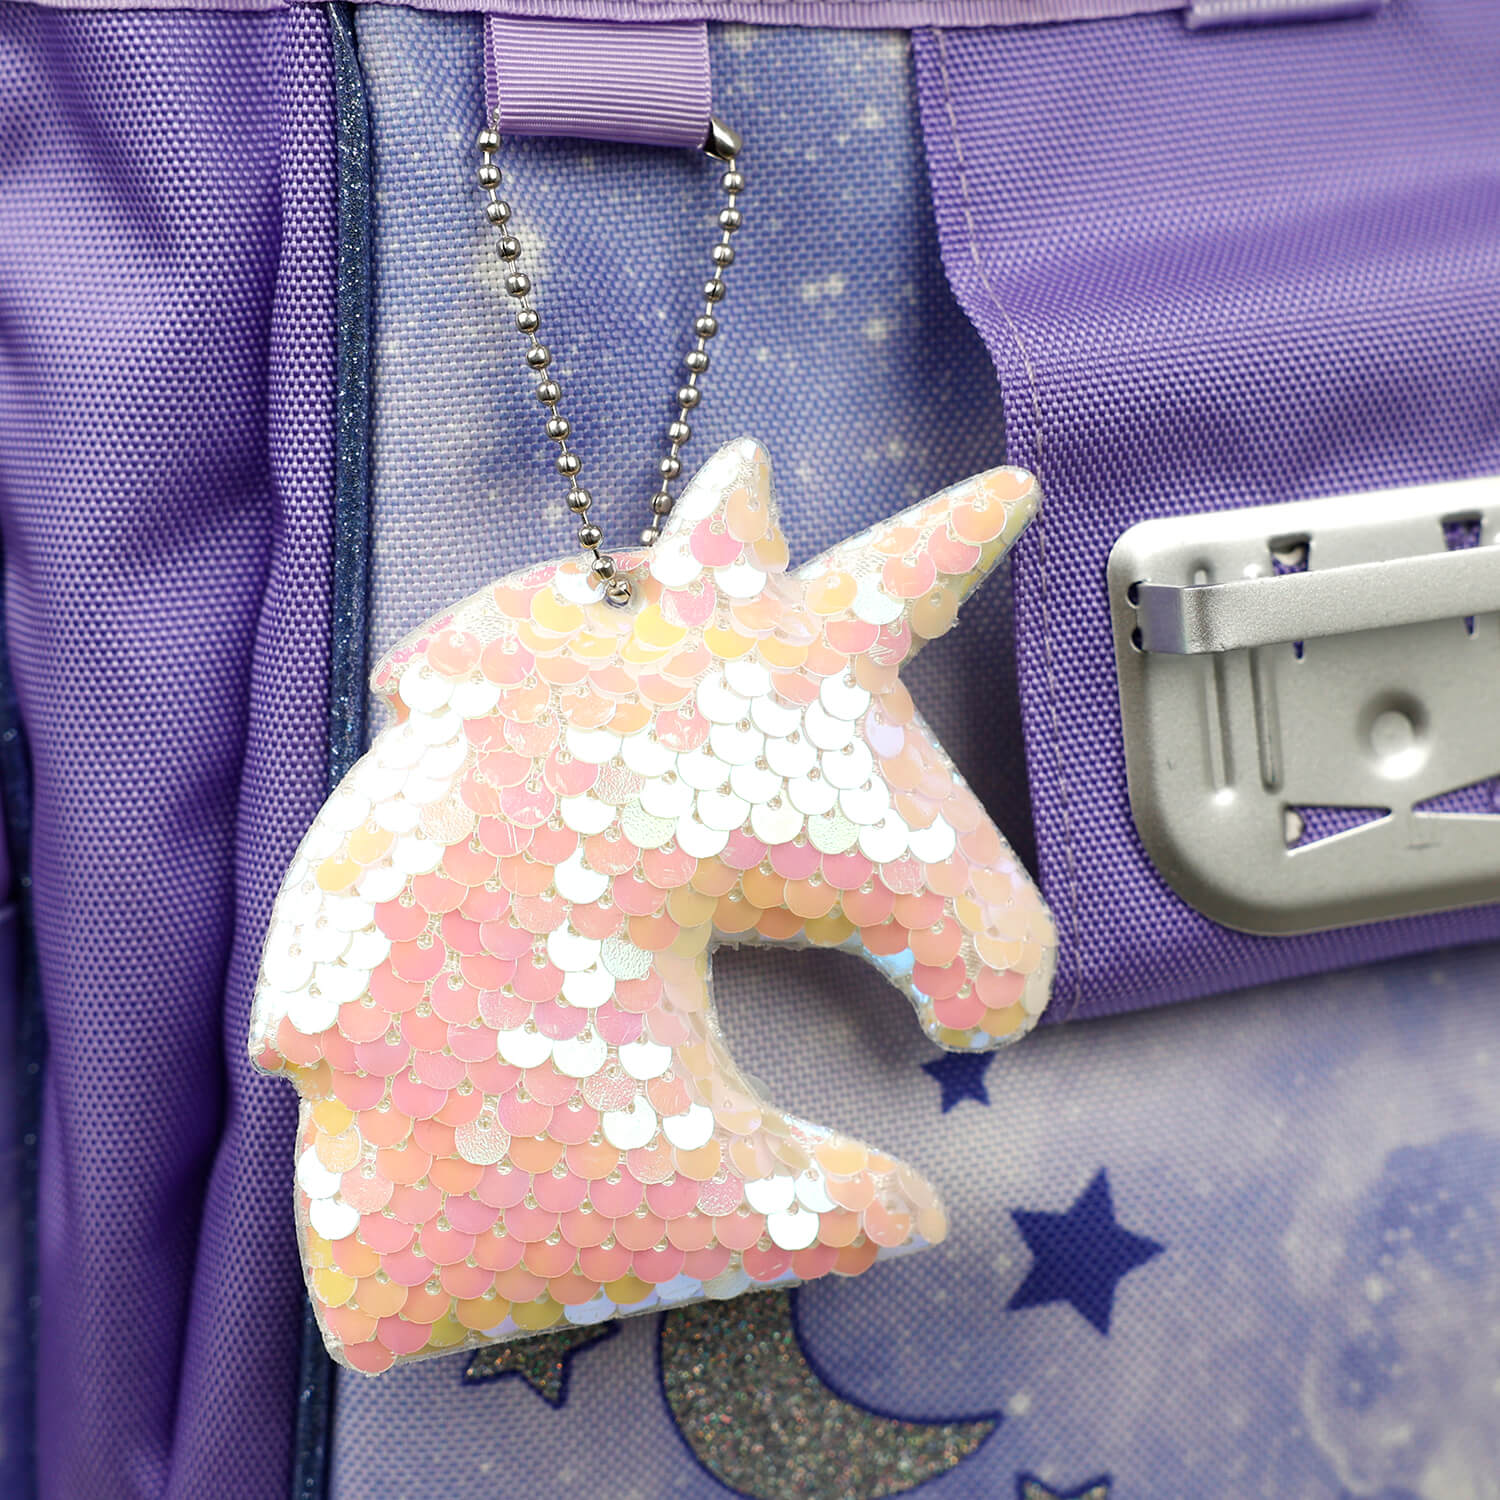 Keychain White And Pink Unicorn Sequin